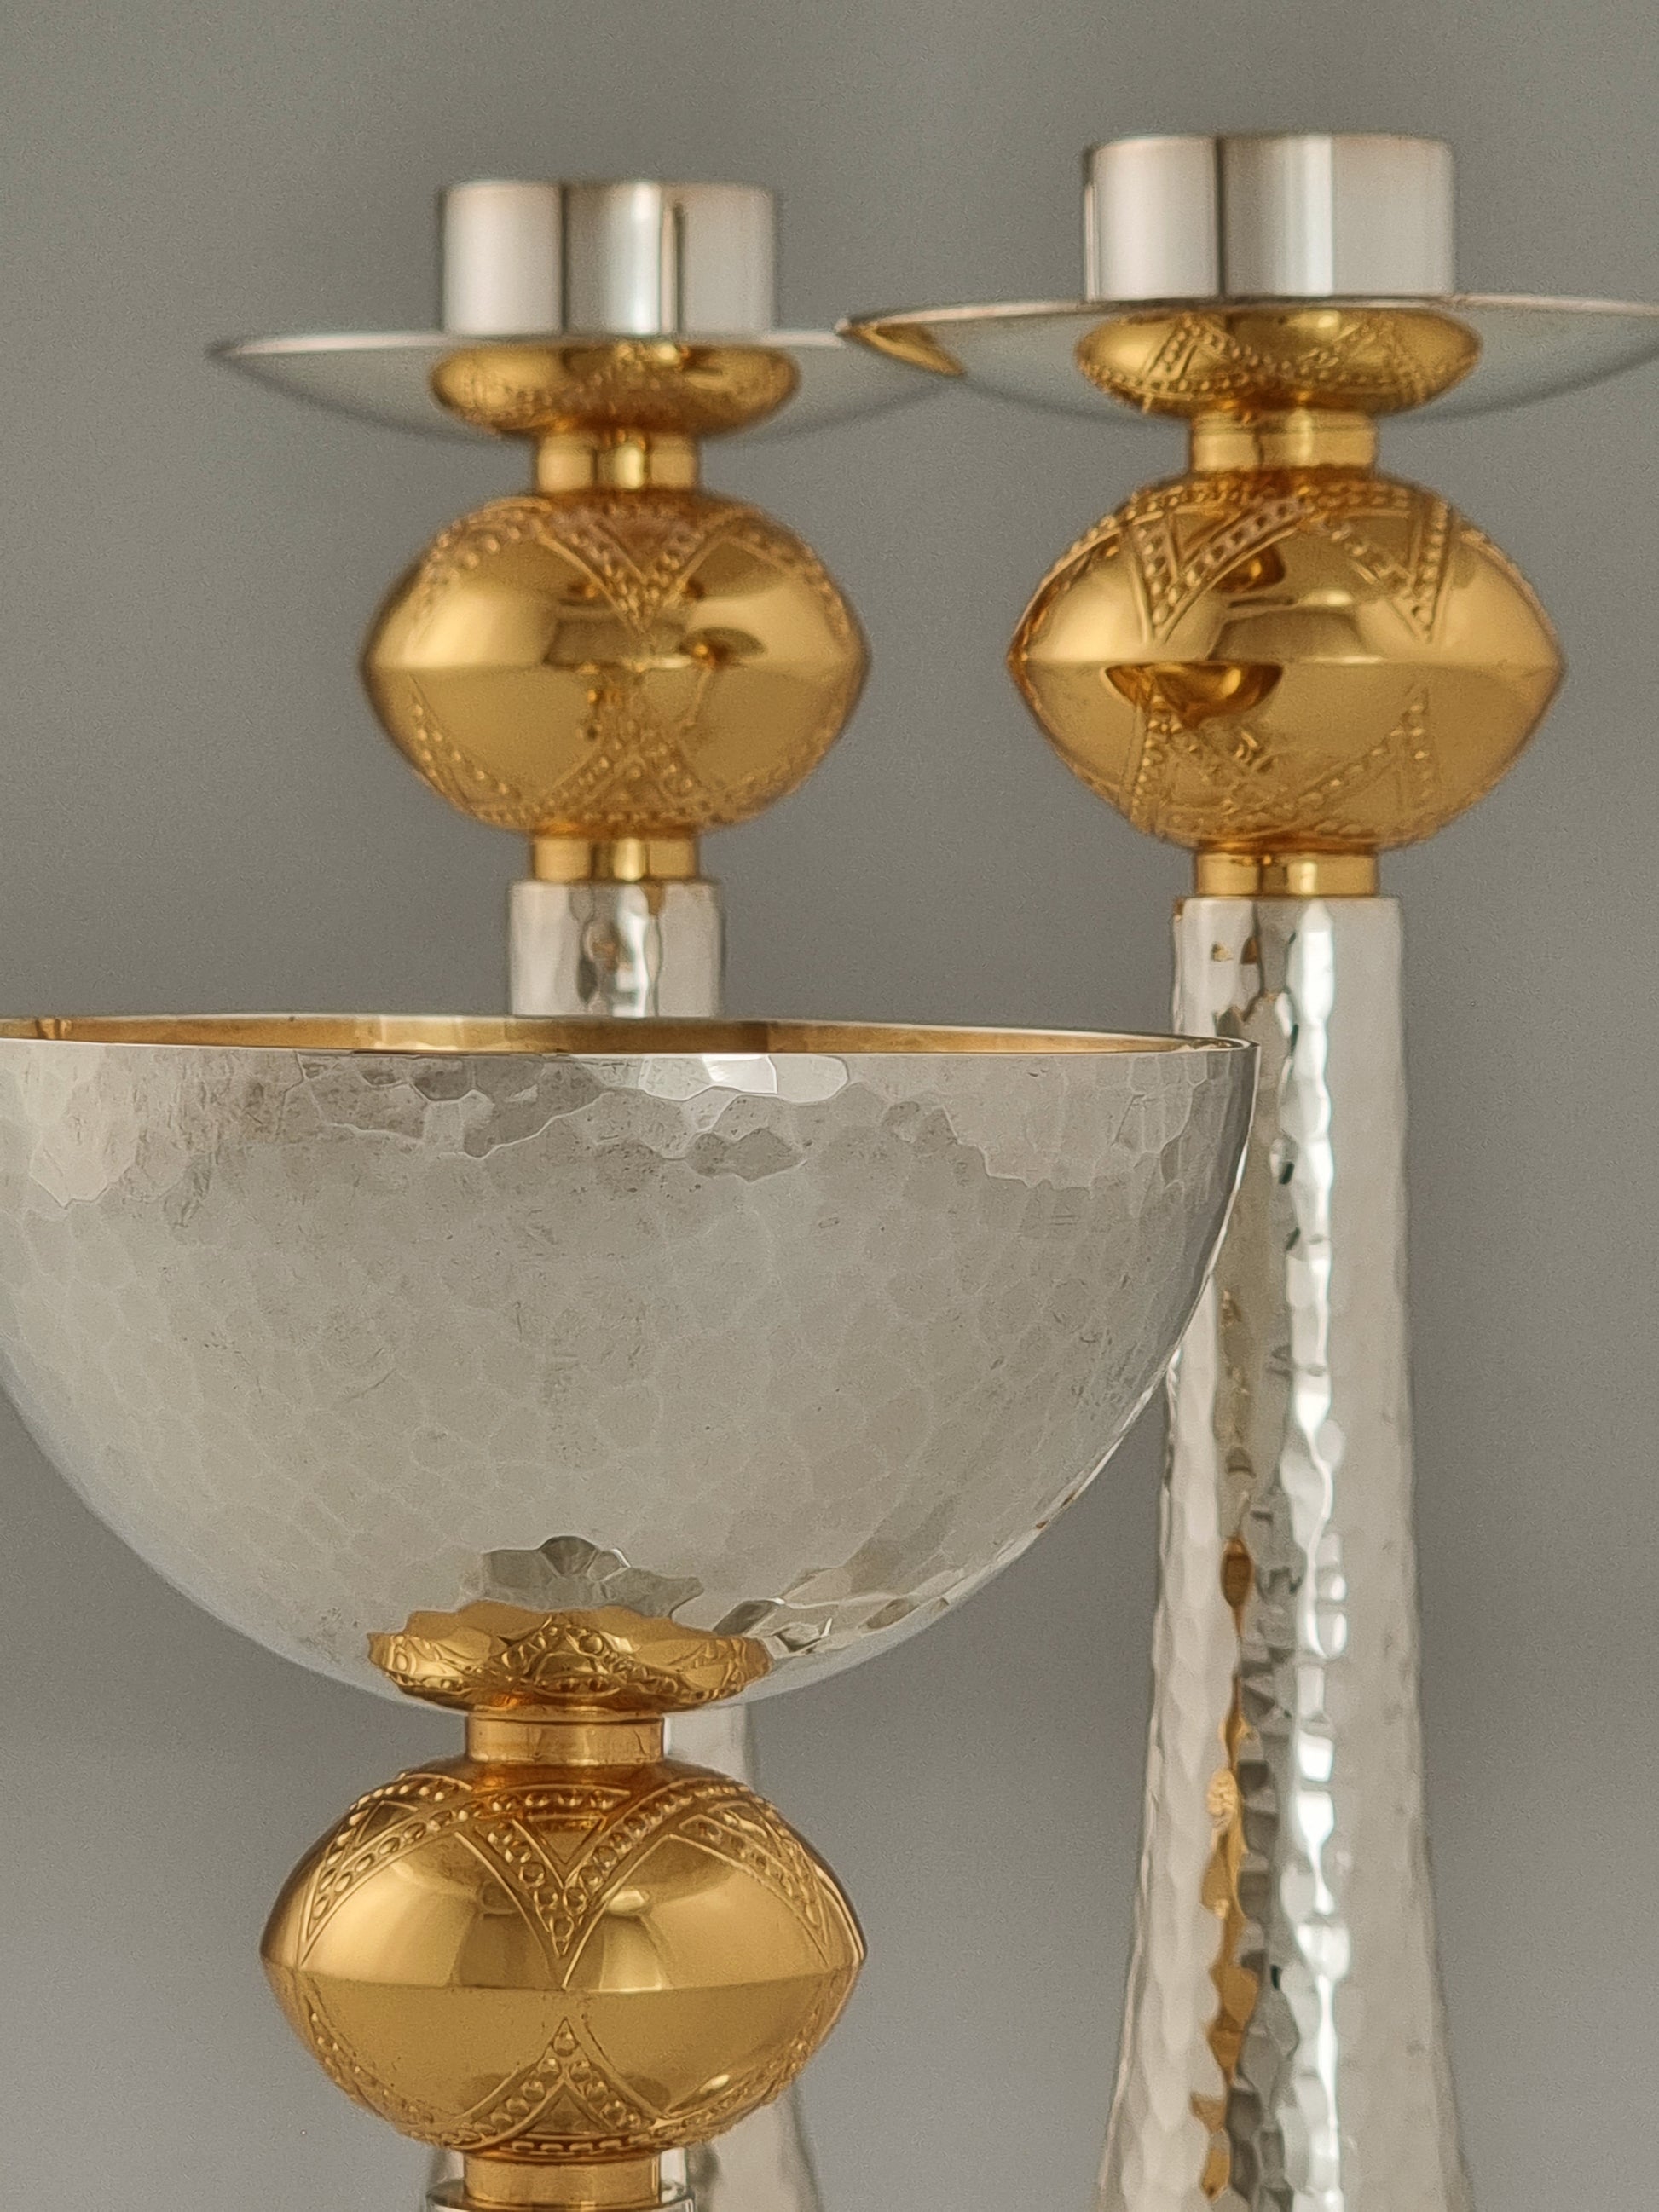 David Kiddush Set. This set was designed in 1993 and is made of silver and gold-plated. The cup is 5” high and the candlesticks are 7½“ high.